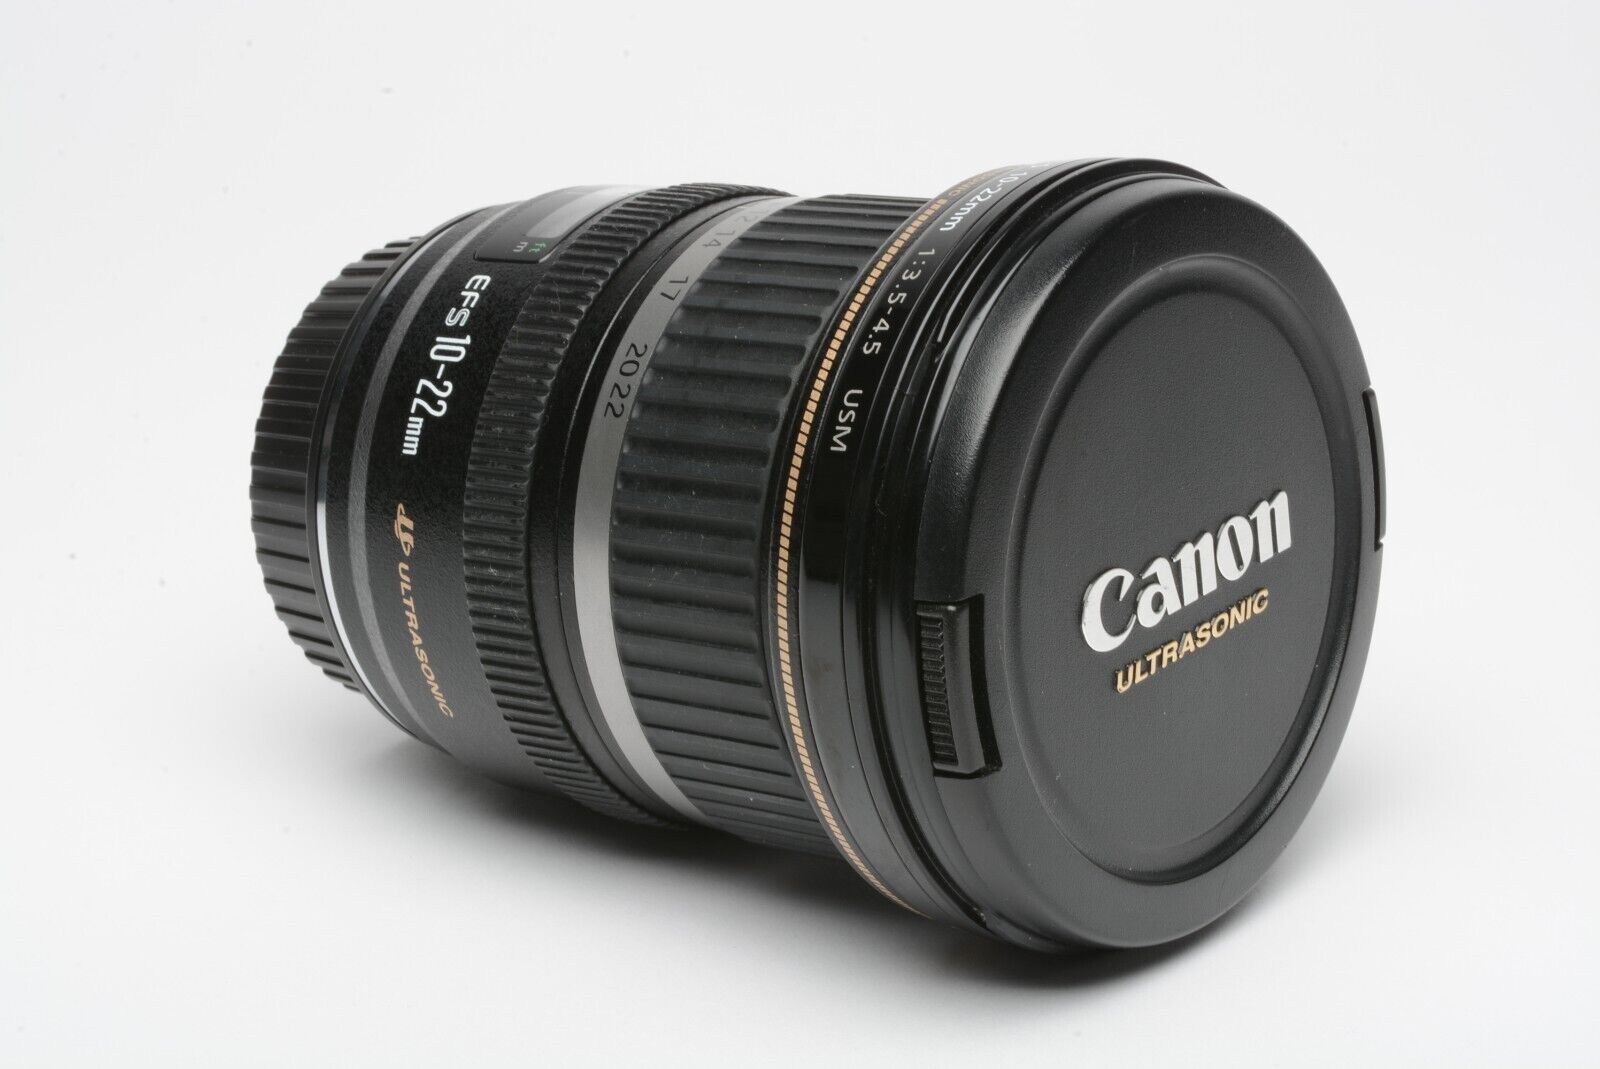 MINT- CANON EF-S 10-22mm f3.5-4.5 L LENS, CAPS, TESTED, CLEAN AND